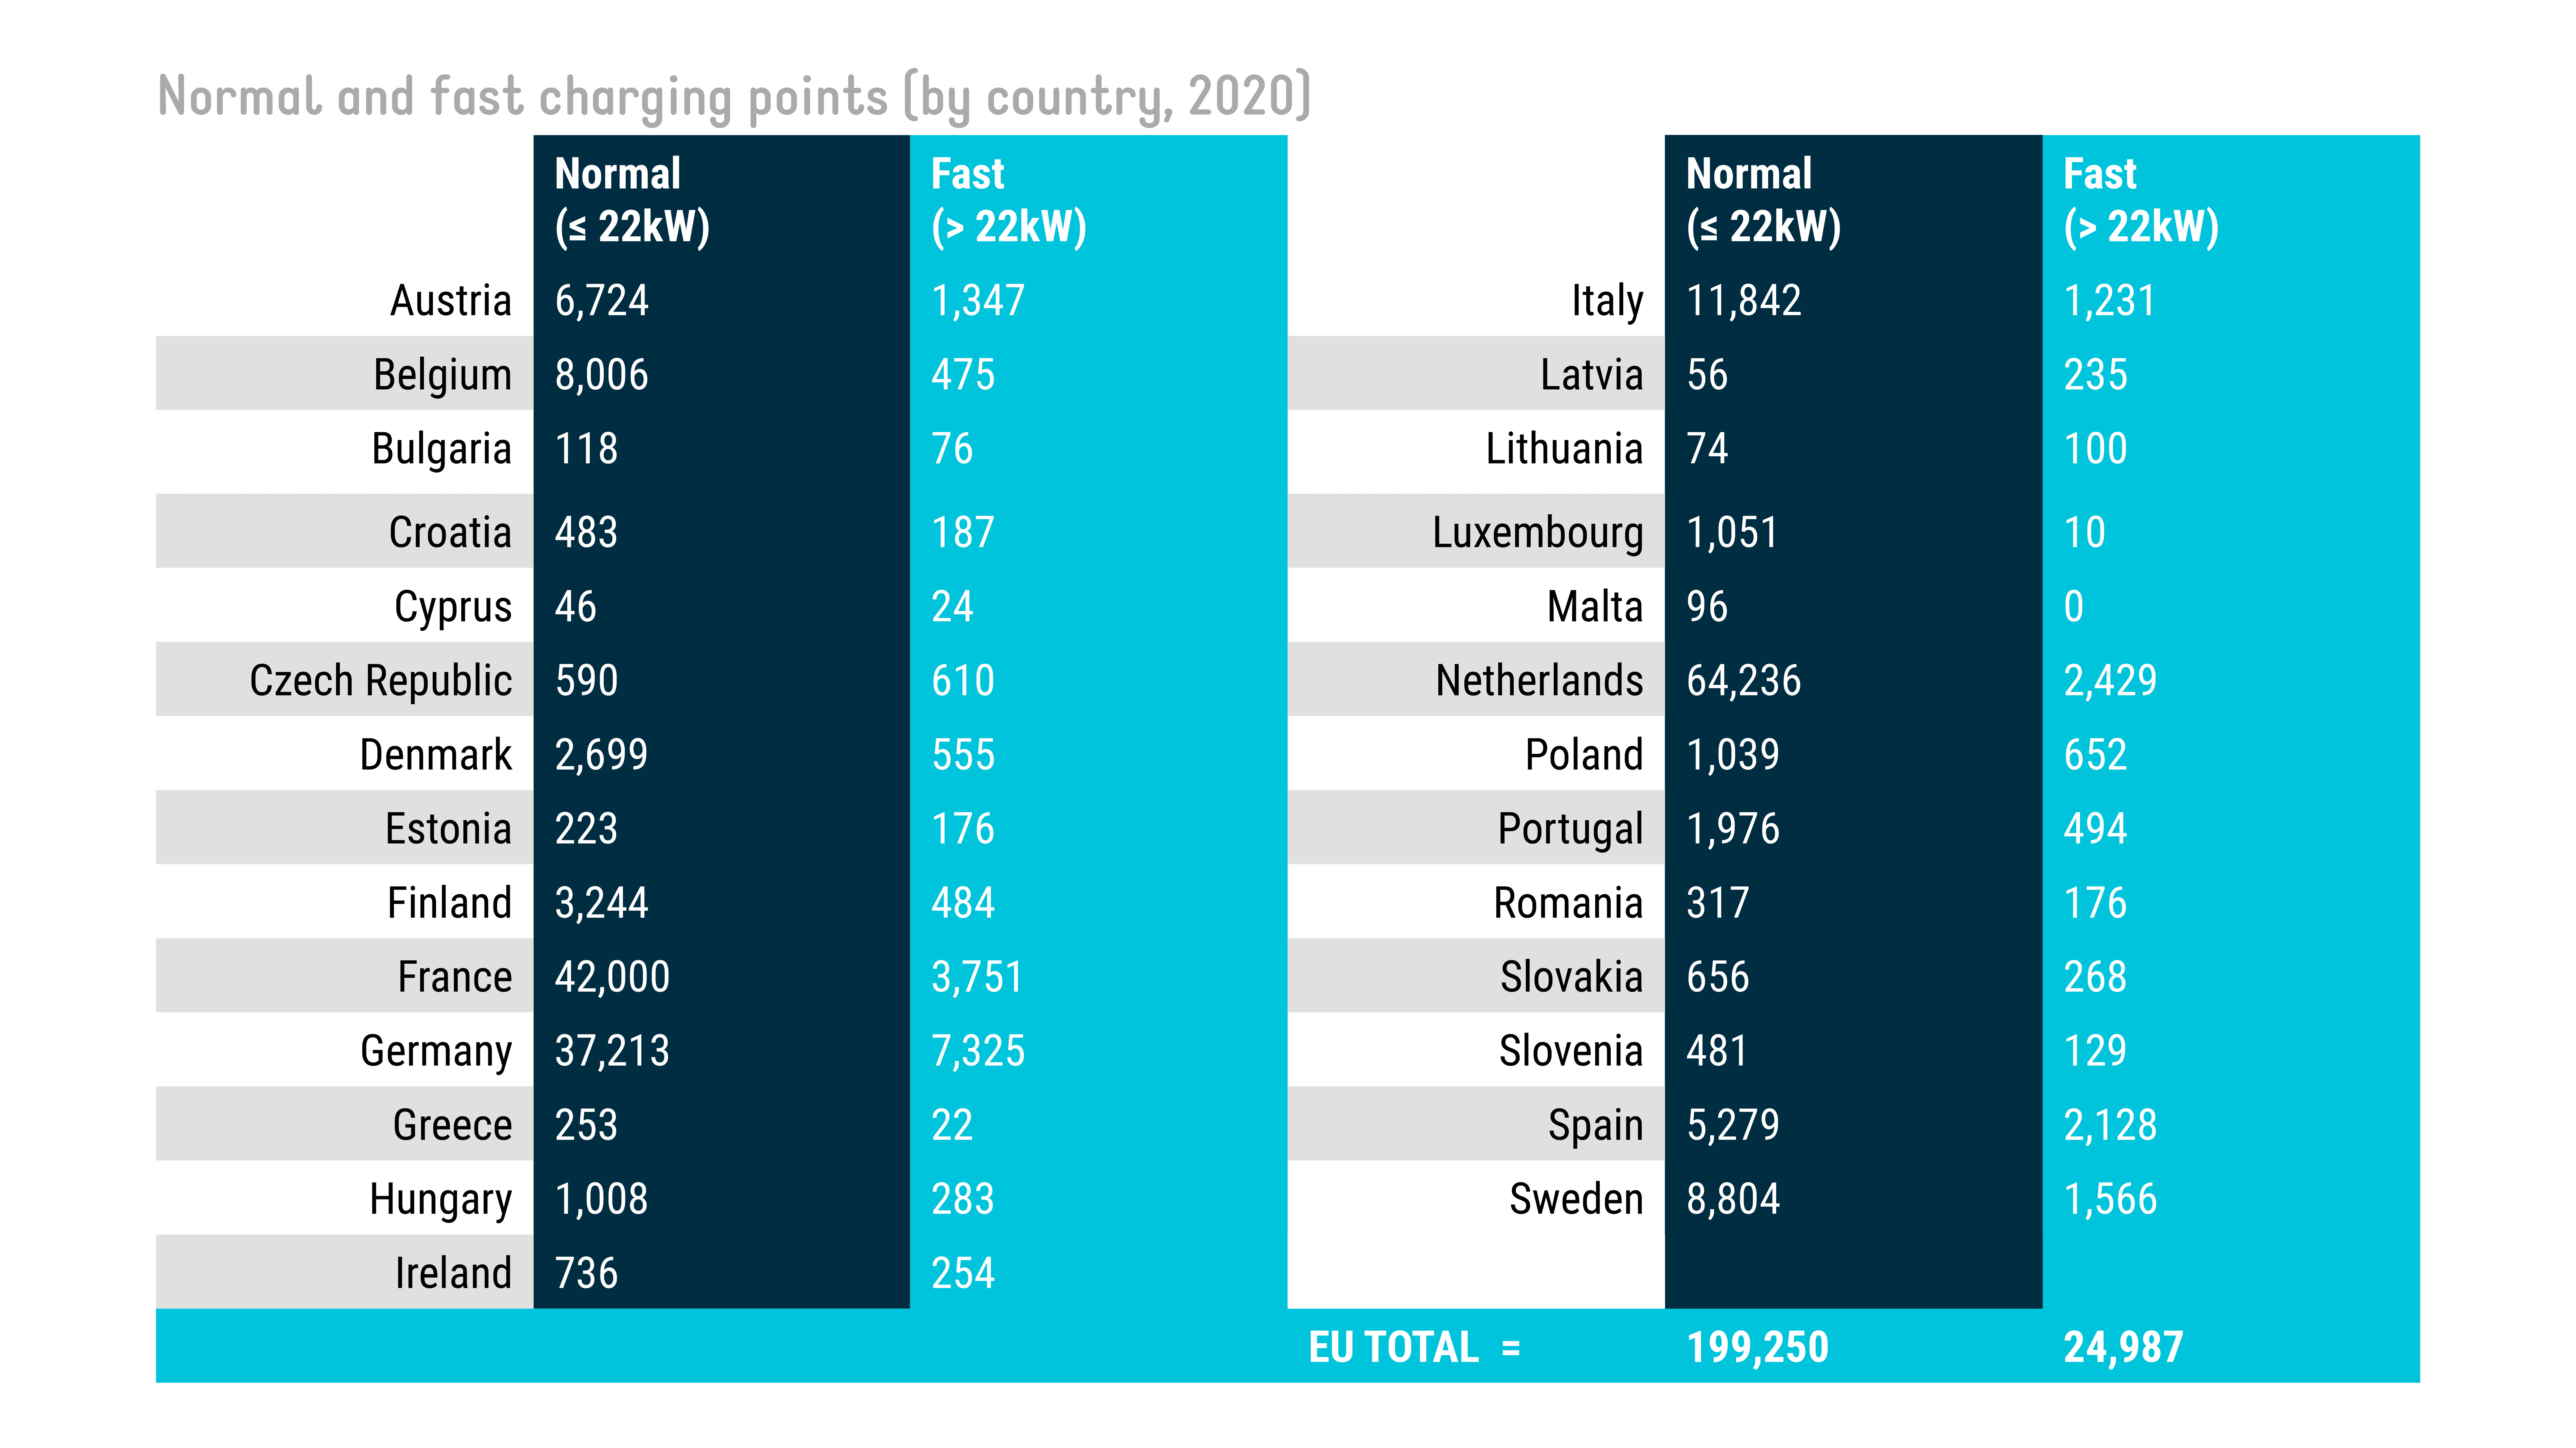 e-mobility-only-1-in-9-charging-points-in-eu-is-fast_10000.png